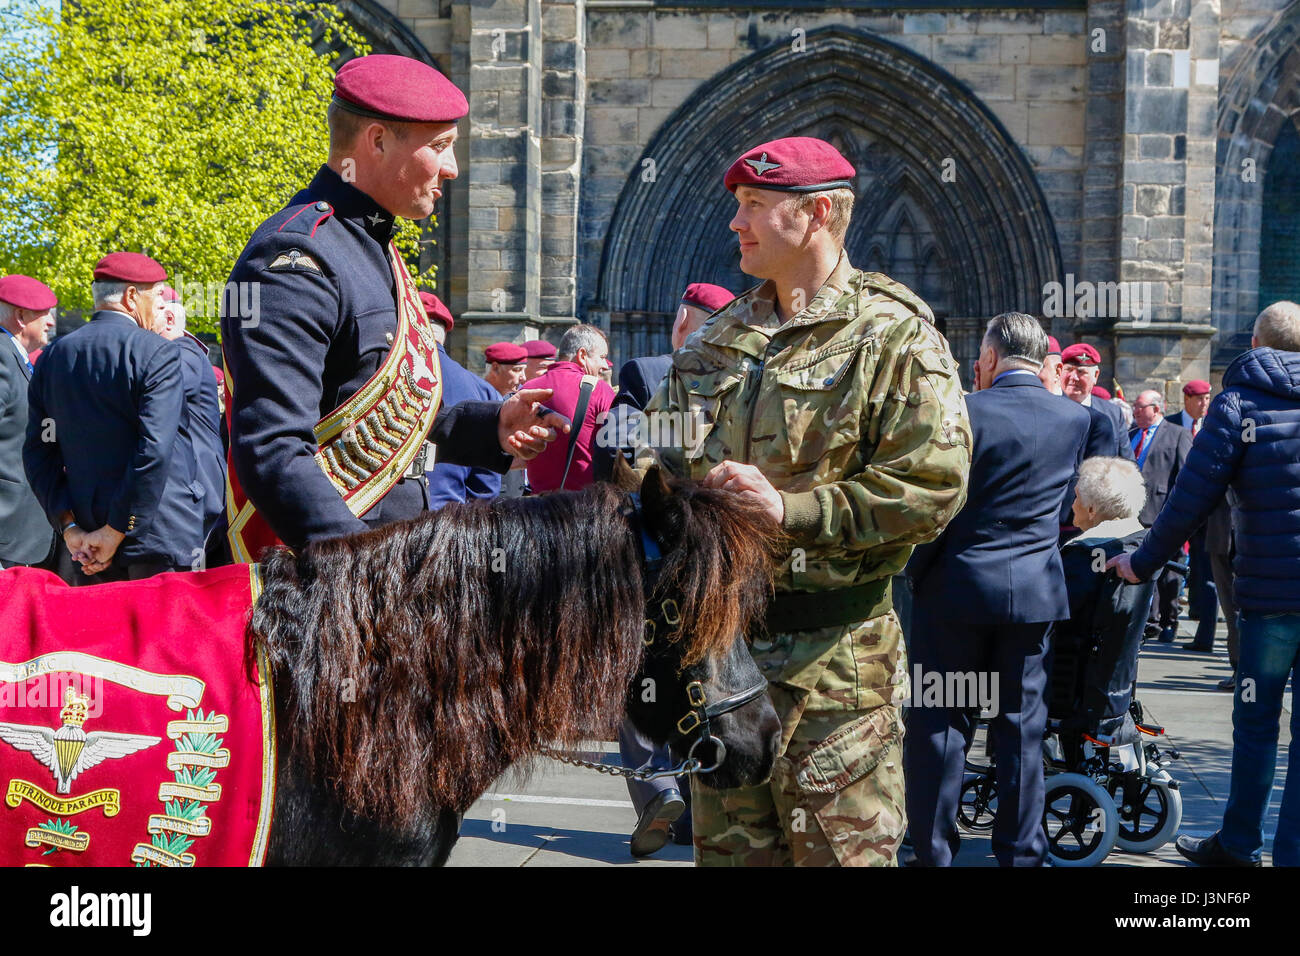 Glasgow, Scotland, UK. 6th May, 2017. To commemorate the 70th anniversary of the forming of XV (Scottish Volunteer) battalion of the Parachute Regiment, later to be known as '4 Para', a service was held at Glasgow cathedral folllowed by a march through the city, led by the Parachute Regiments mascot, a Shetland pony called Pegasus. The march finished in George Square where there as a march past and salute followed by an address by Lt Colonel Pat Conn OBE. Credit: Findlay/Alamy Live News Stock Photo